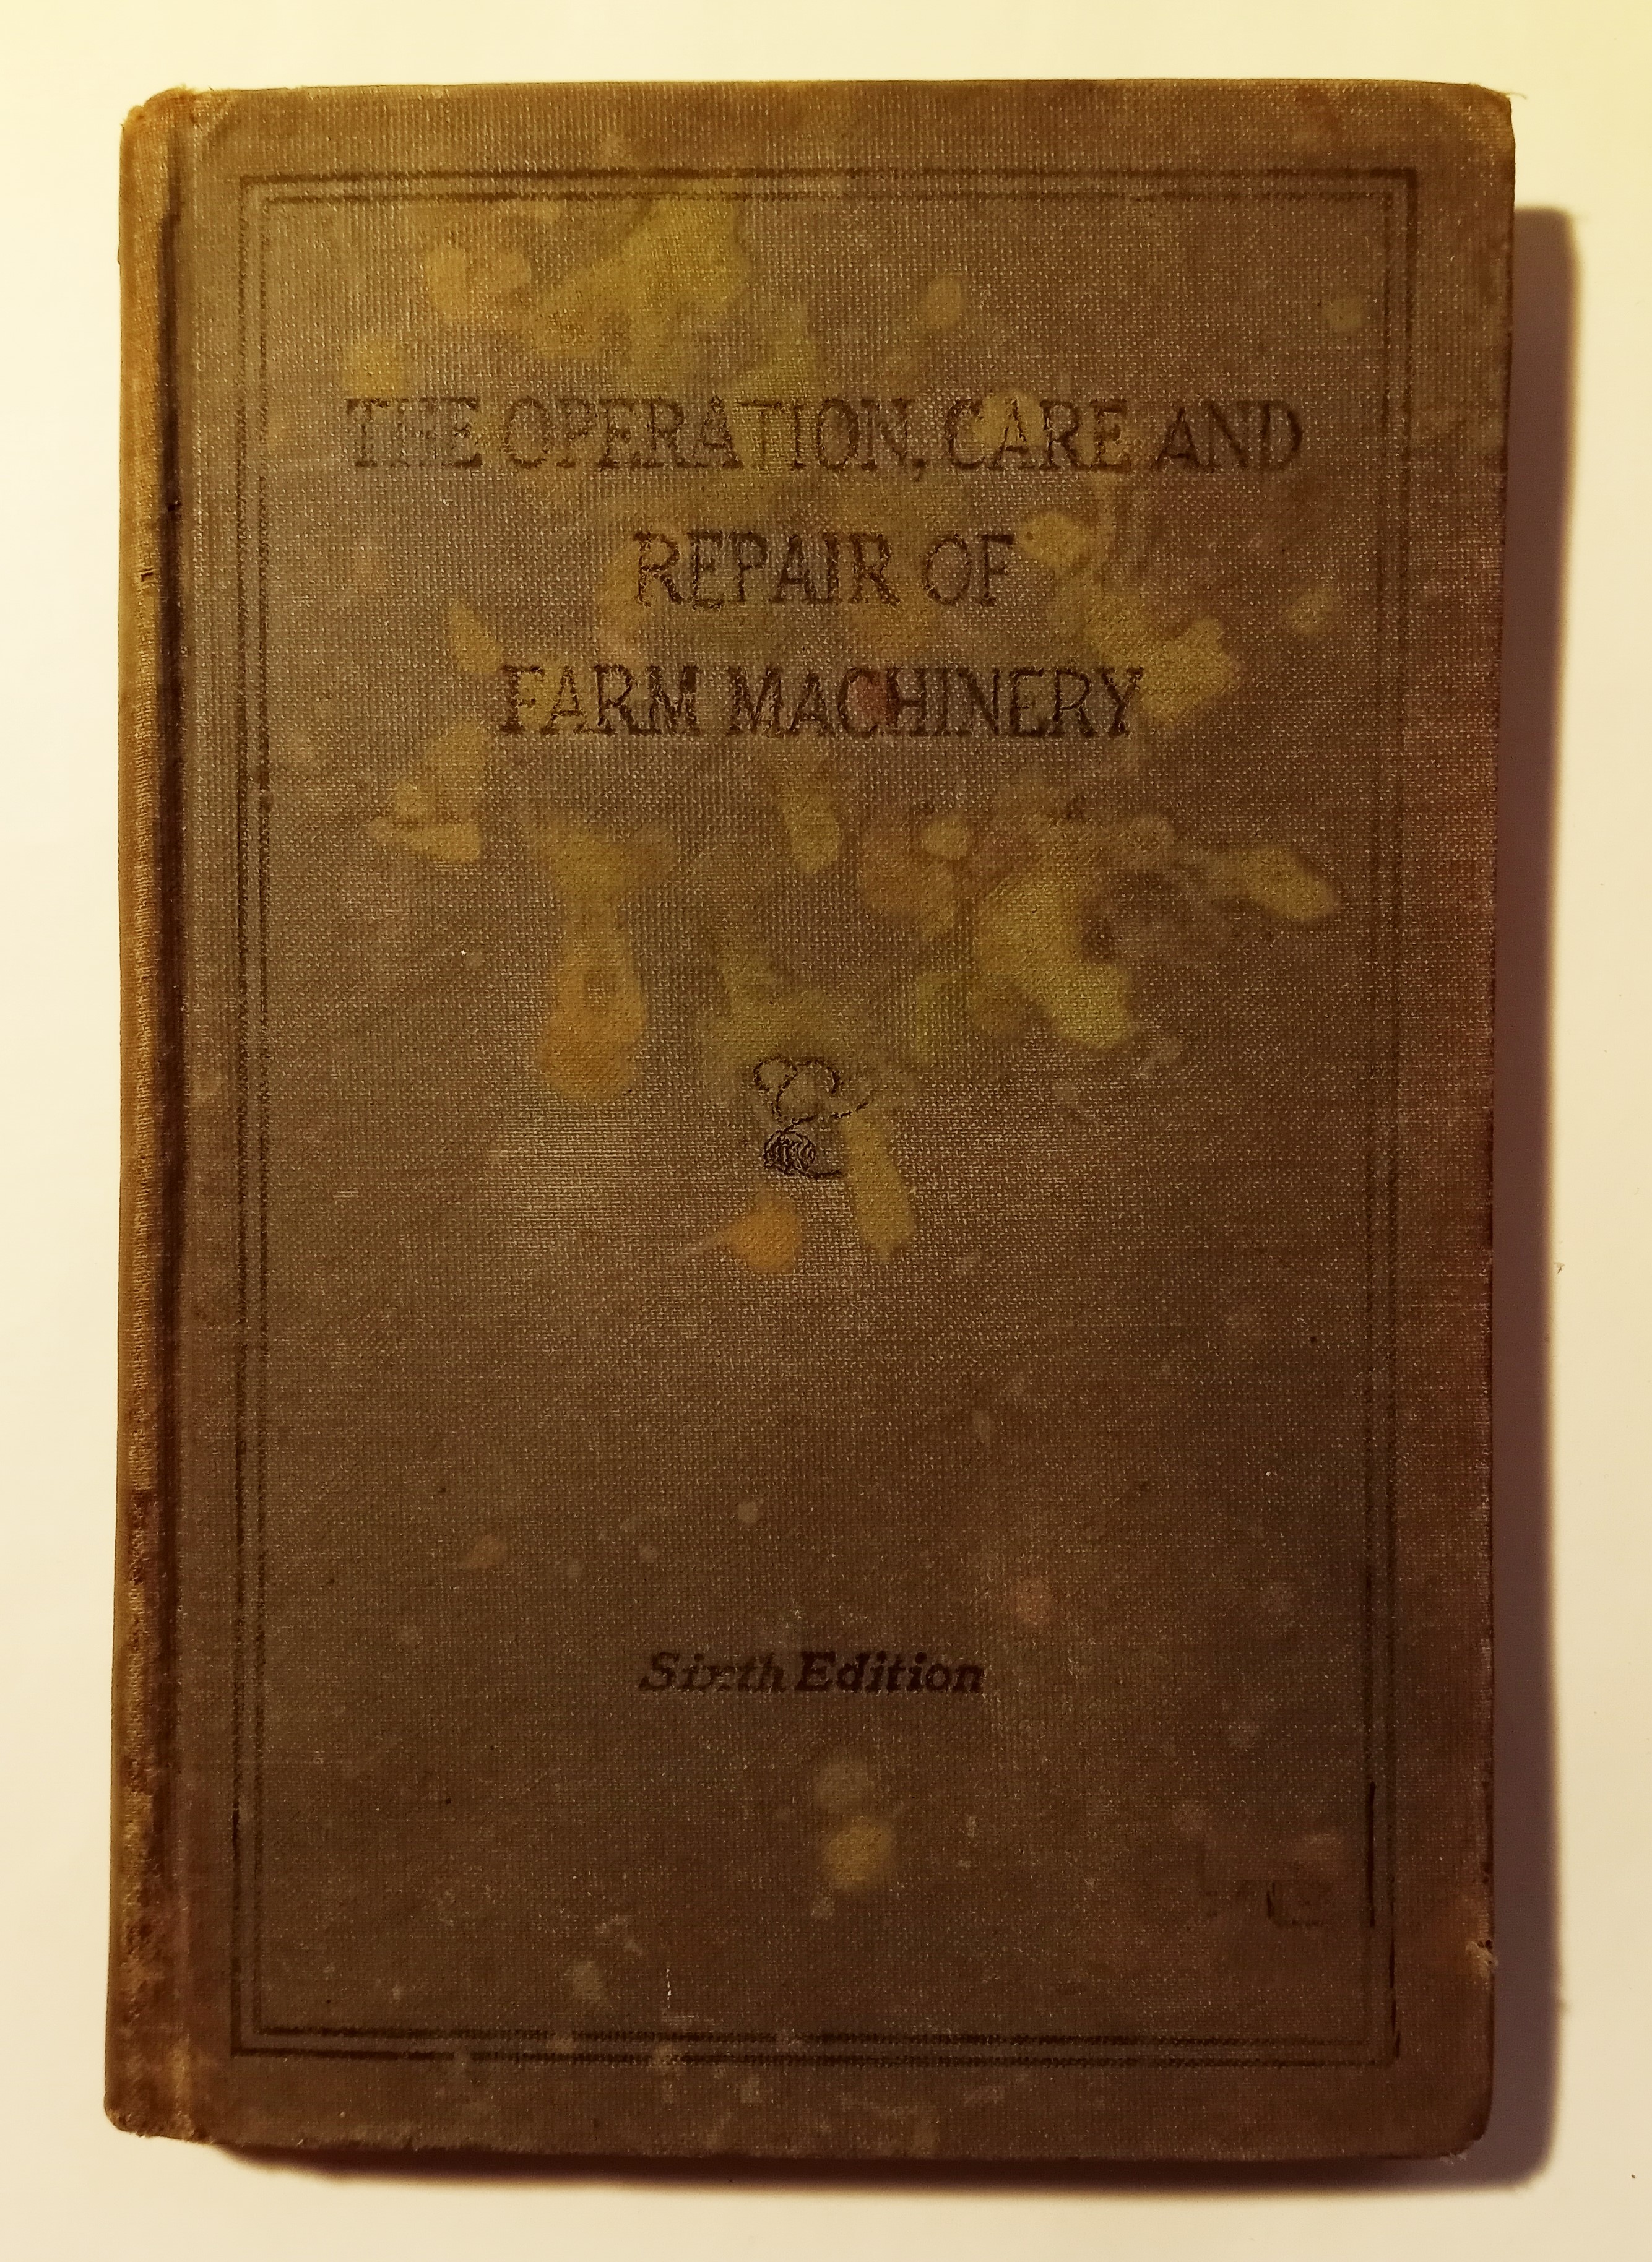 Image for Operation, Care and Repair of Farm Machinery, the :  6e, Sixth Edition, 1932